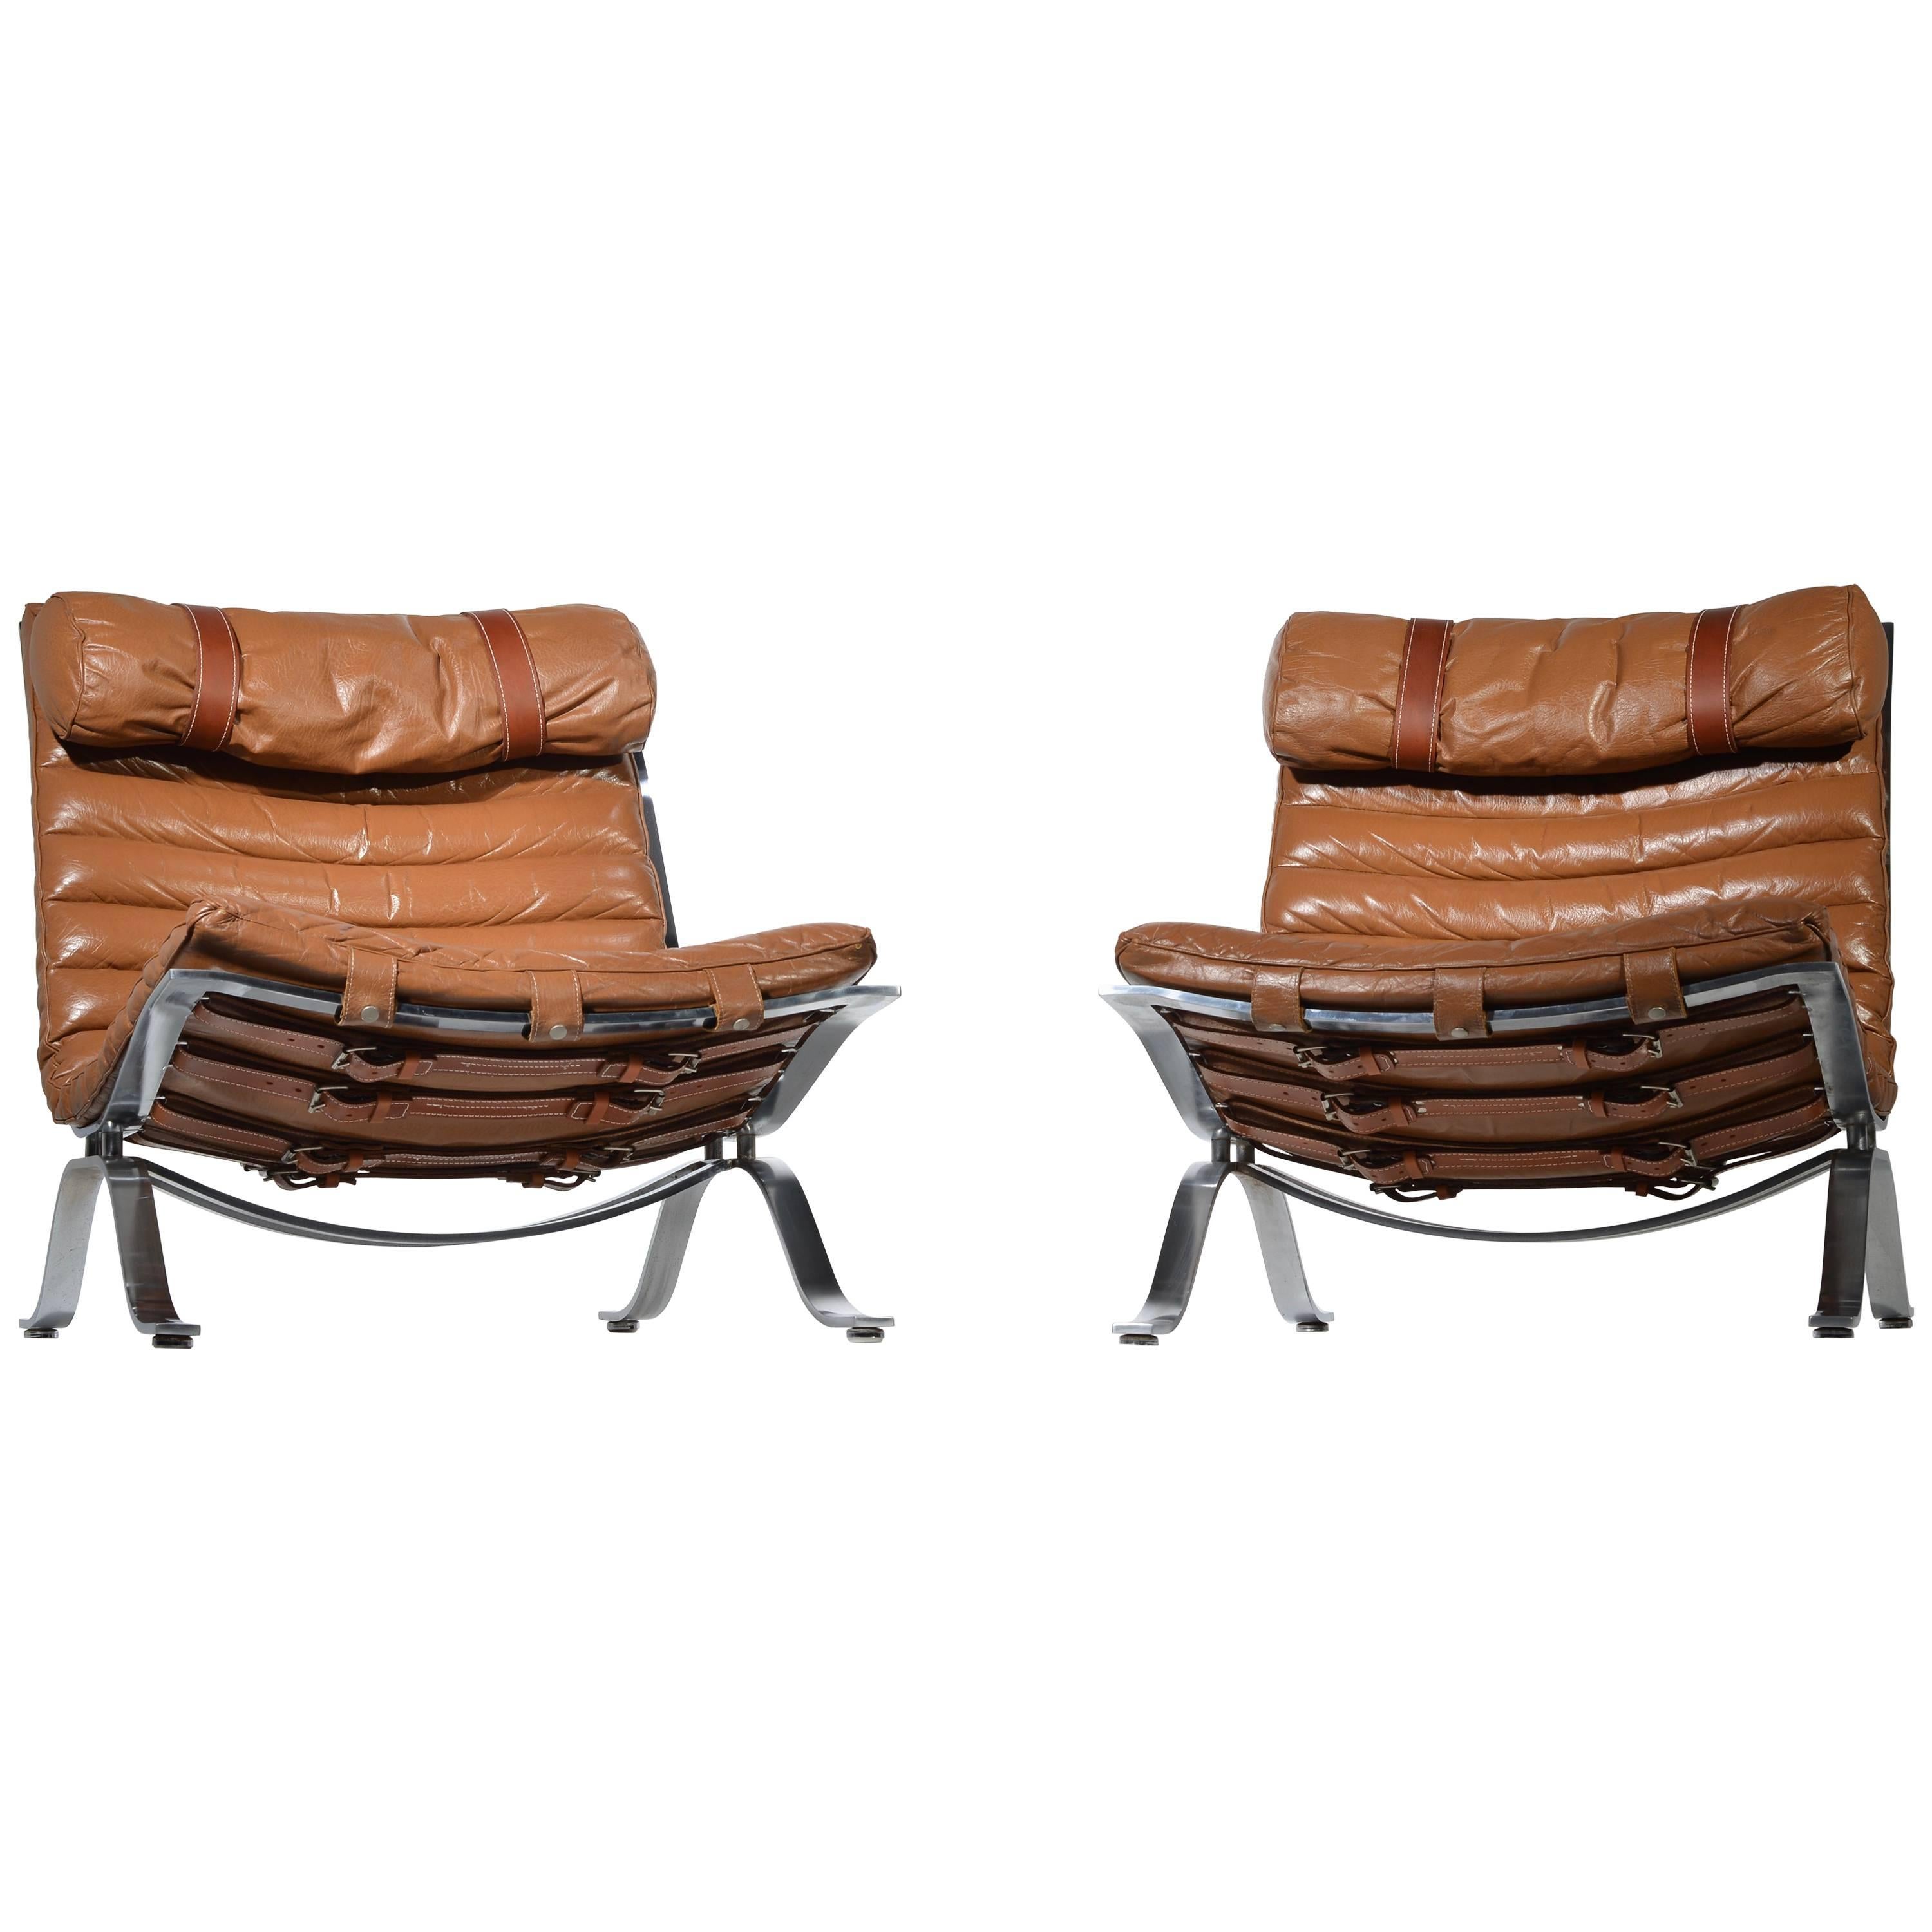 Arne Norell Ari Easy Chairs in Cognac Leather by Norell AB in Sweden